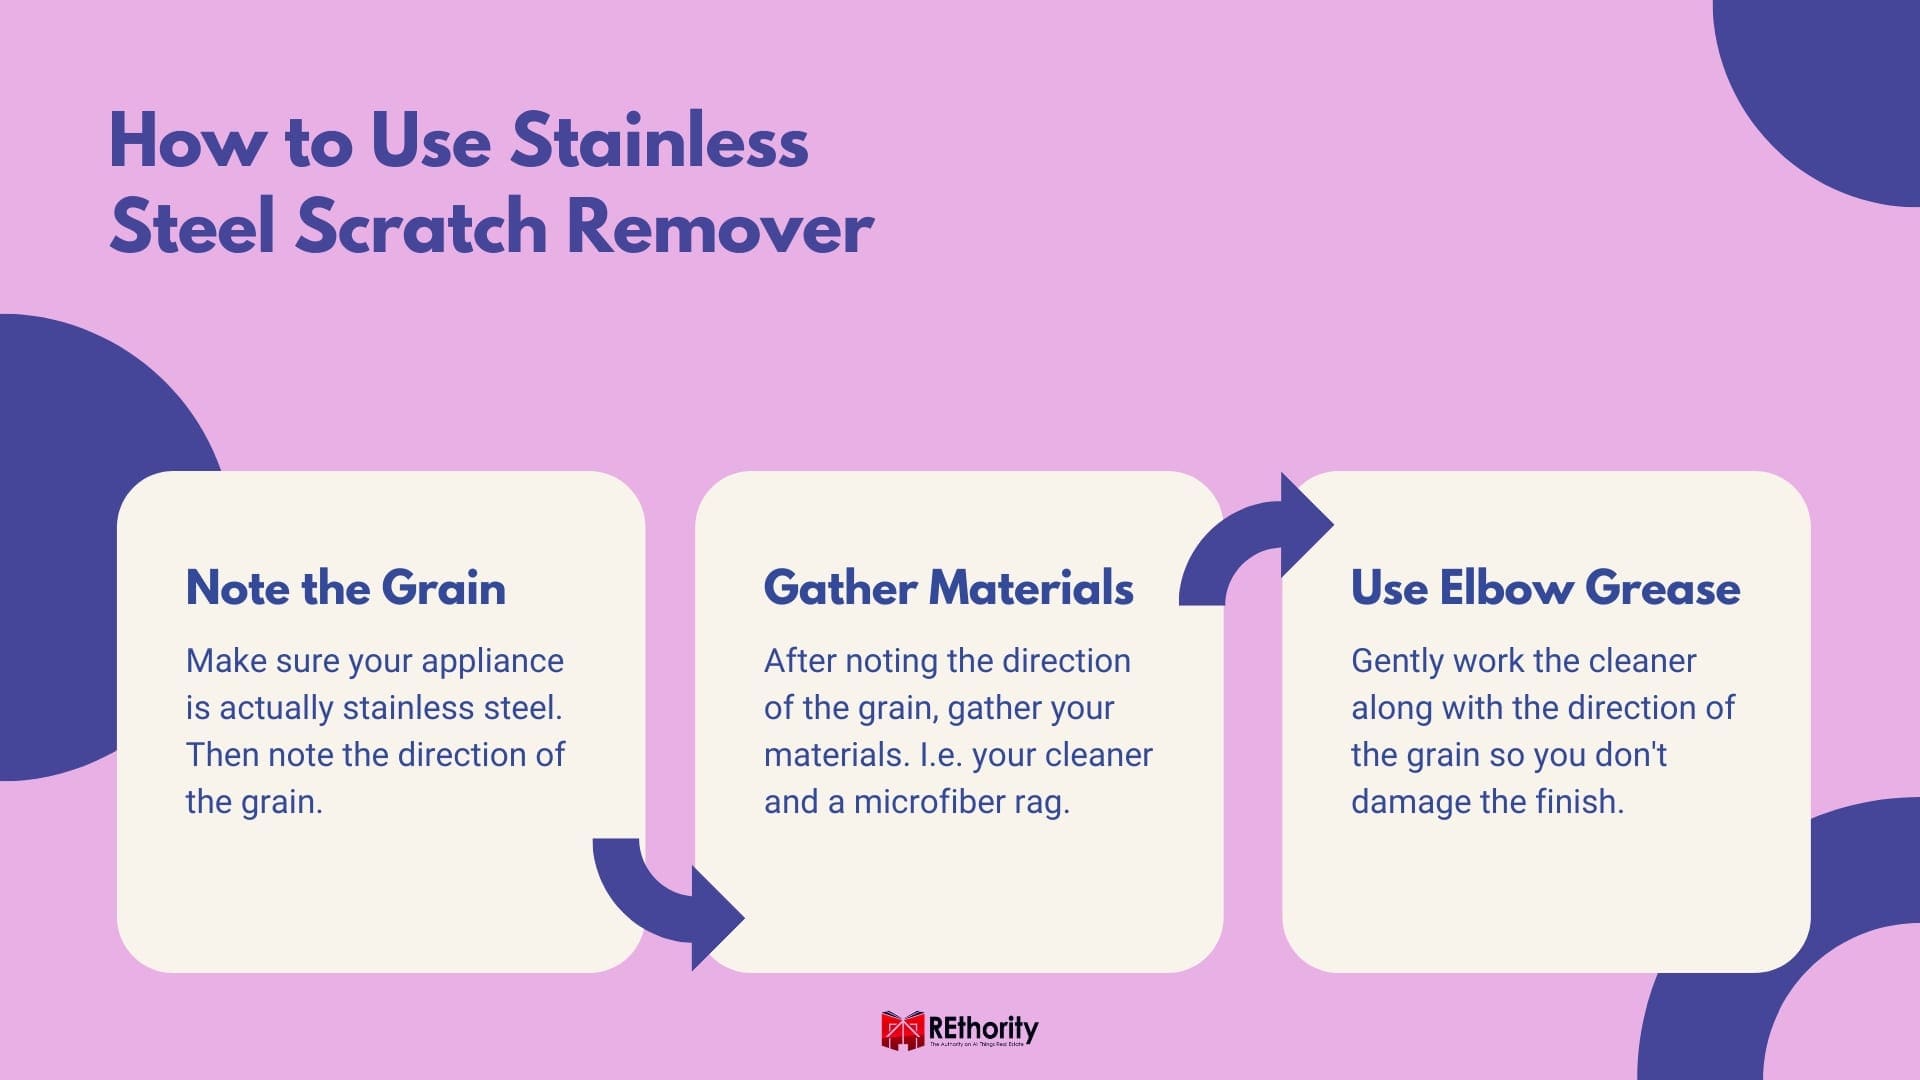 Using Stainless Steel Scratch Remover (2)